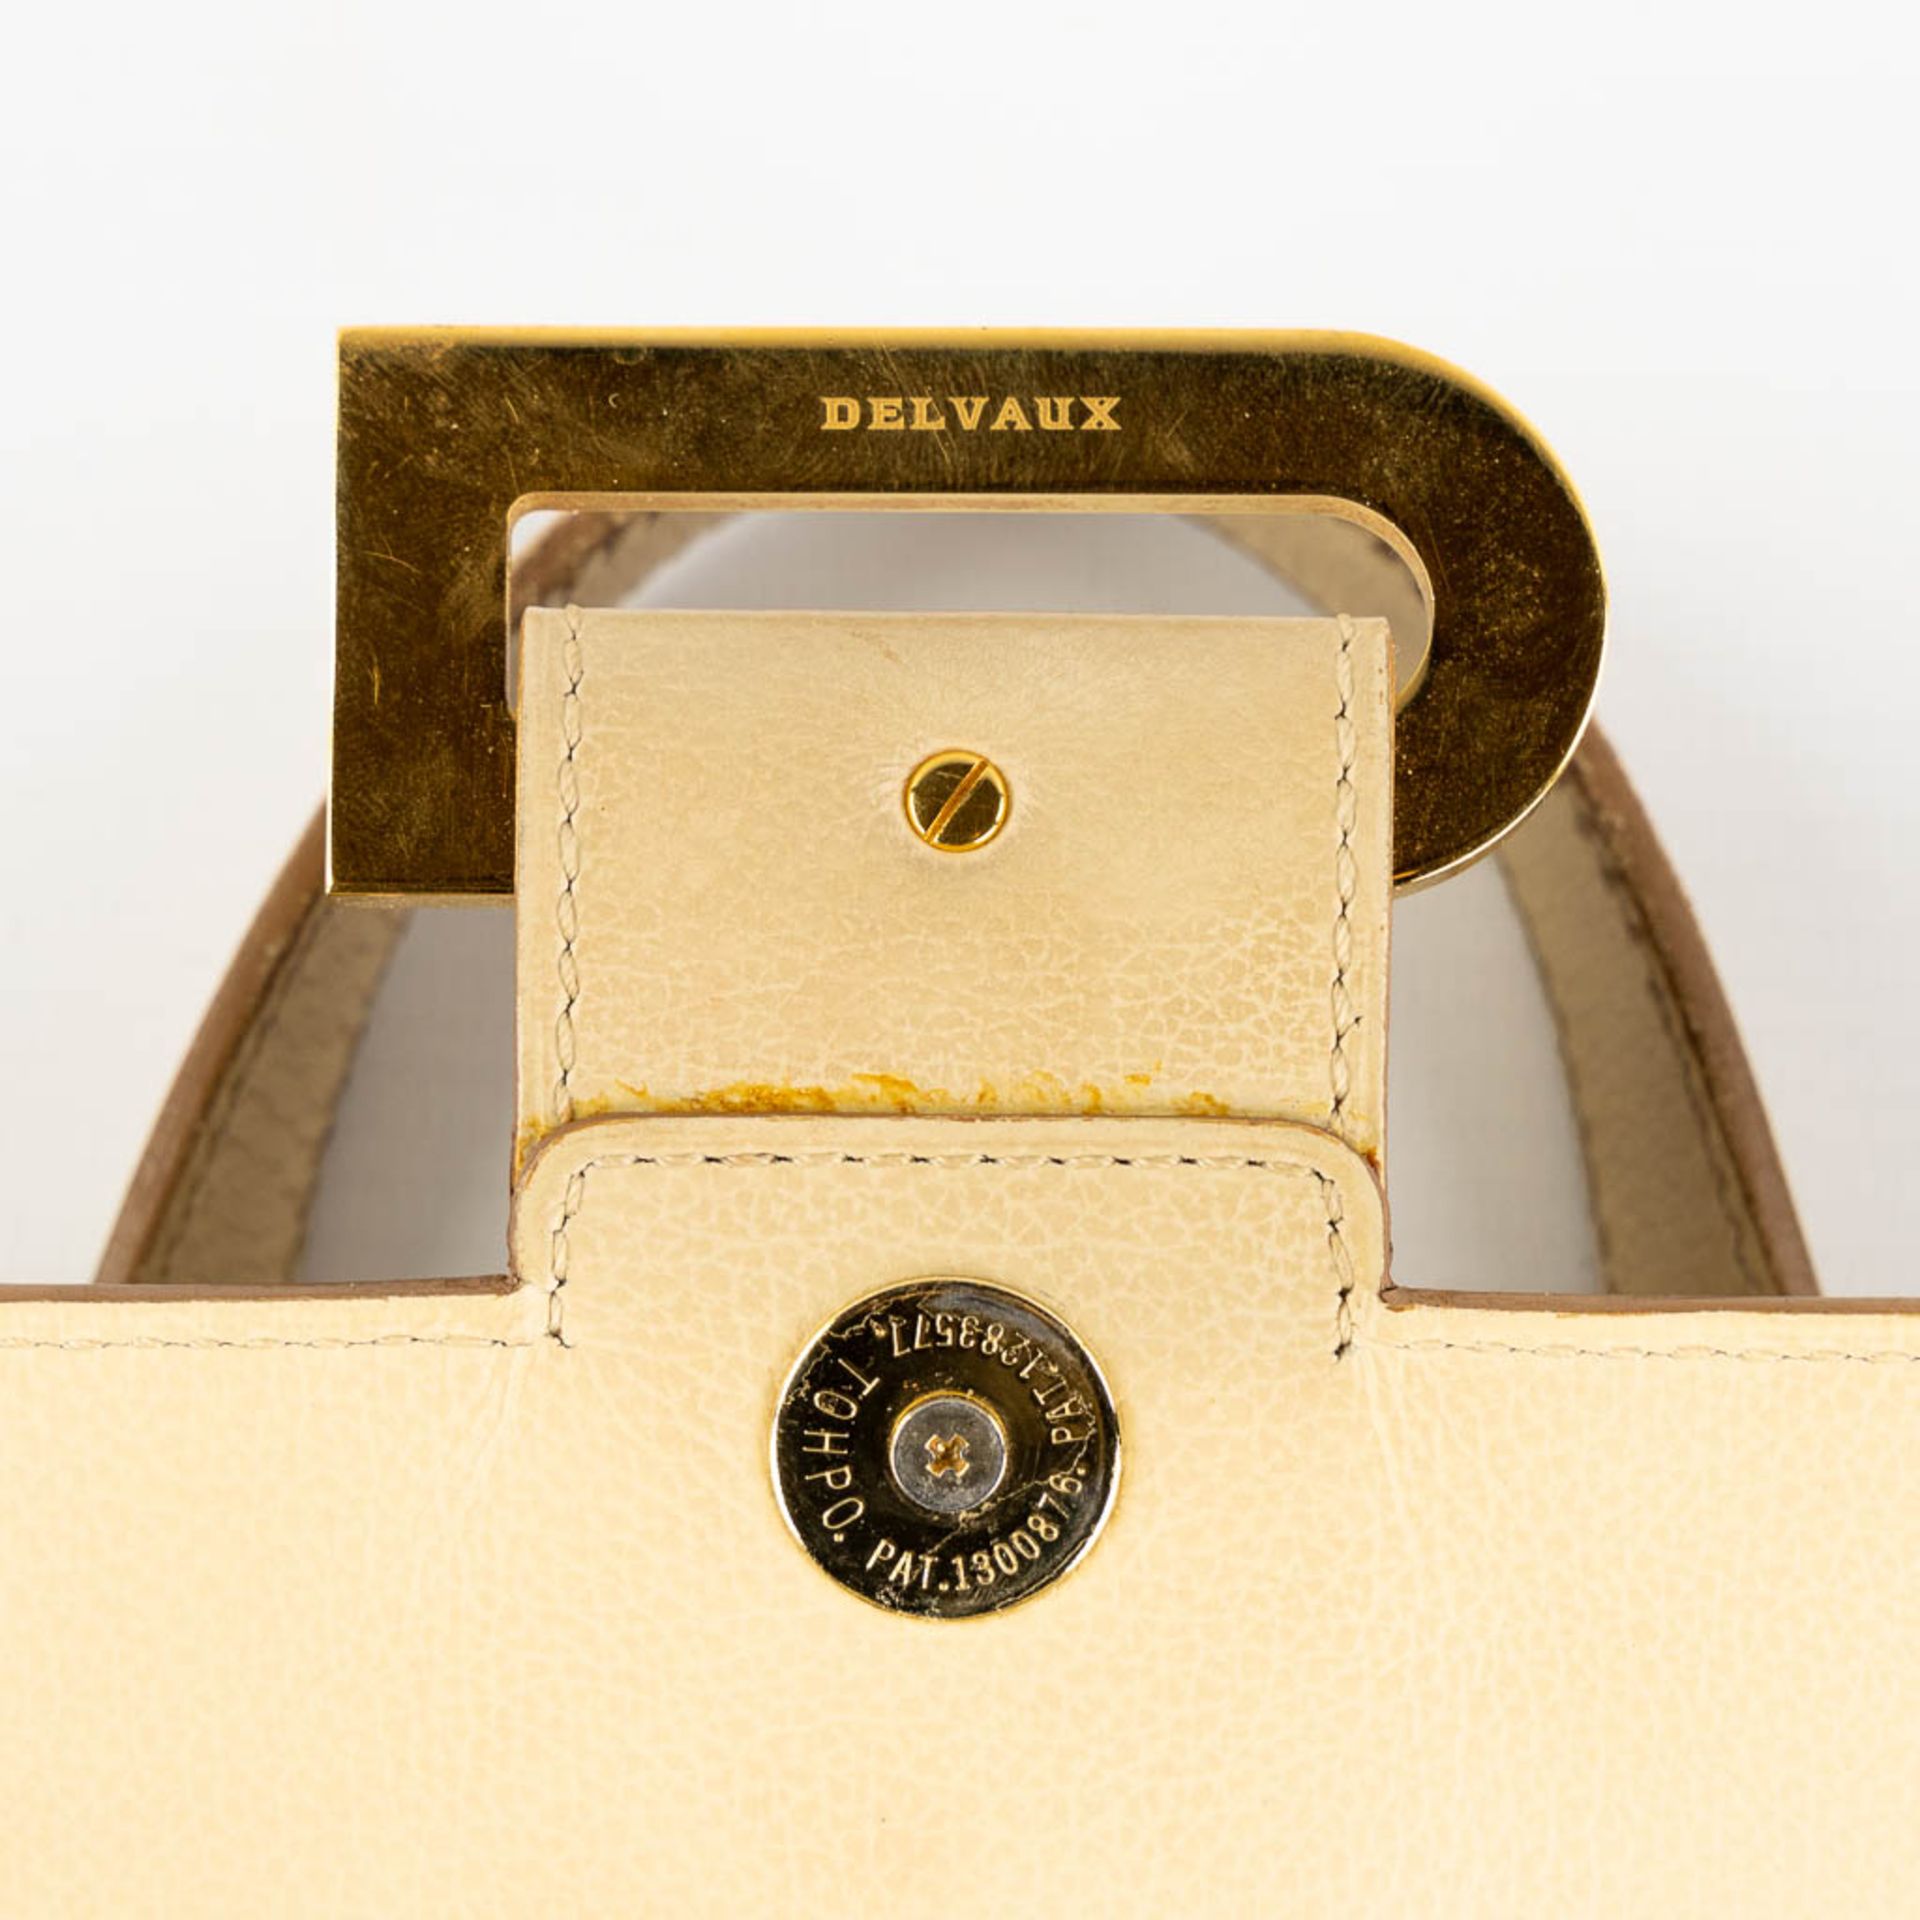 Delvaux model 'Reverie' Jumping, Ivoire. Ivory coloured leather. (L:11 x W:28 x H:23 cm) - Image 13 of 20